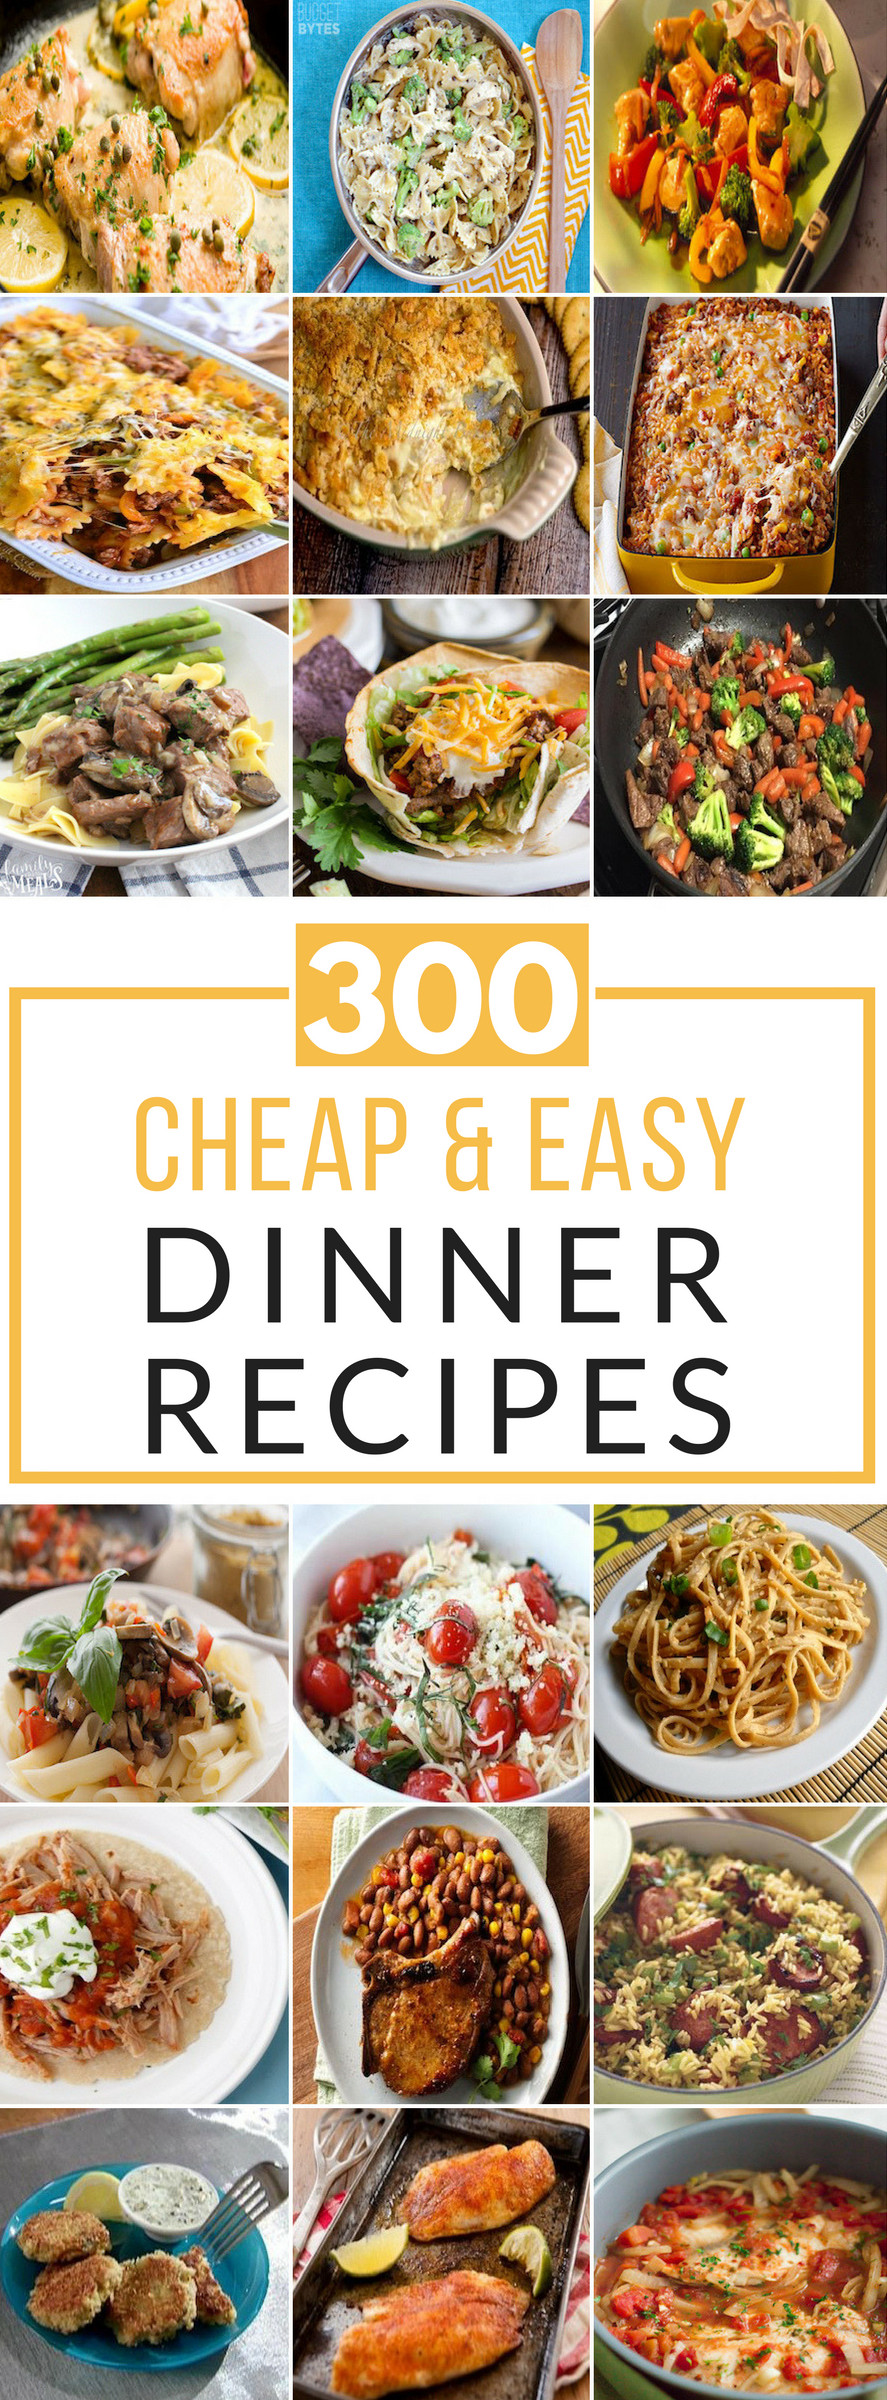 Easy Cheap Dinner Recipes
 300 Cheap and Easy Dinner Recipes Prudent Penny Pincher